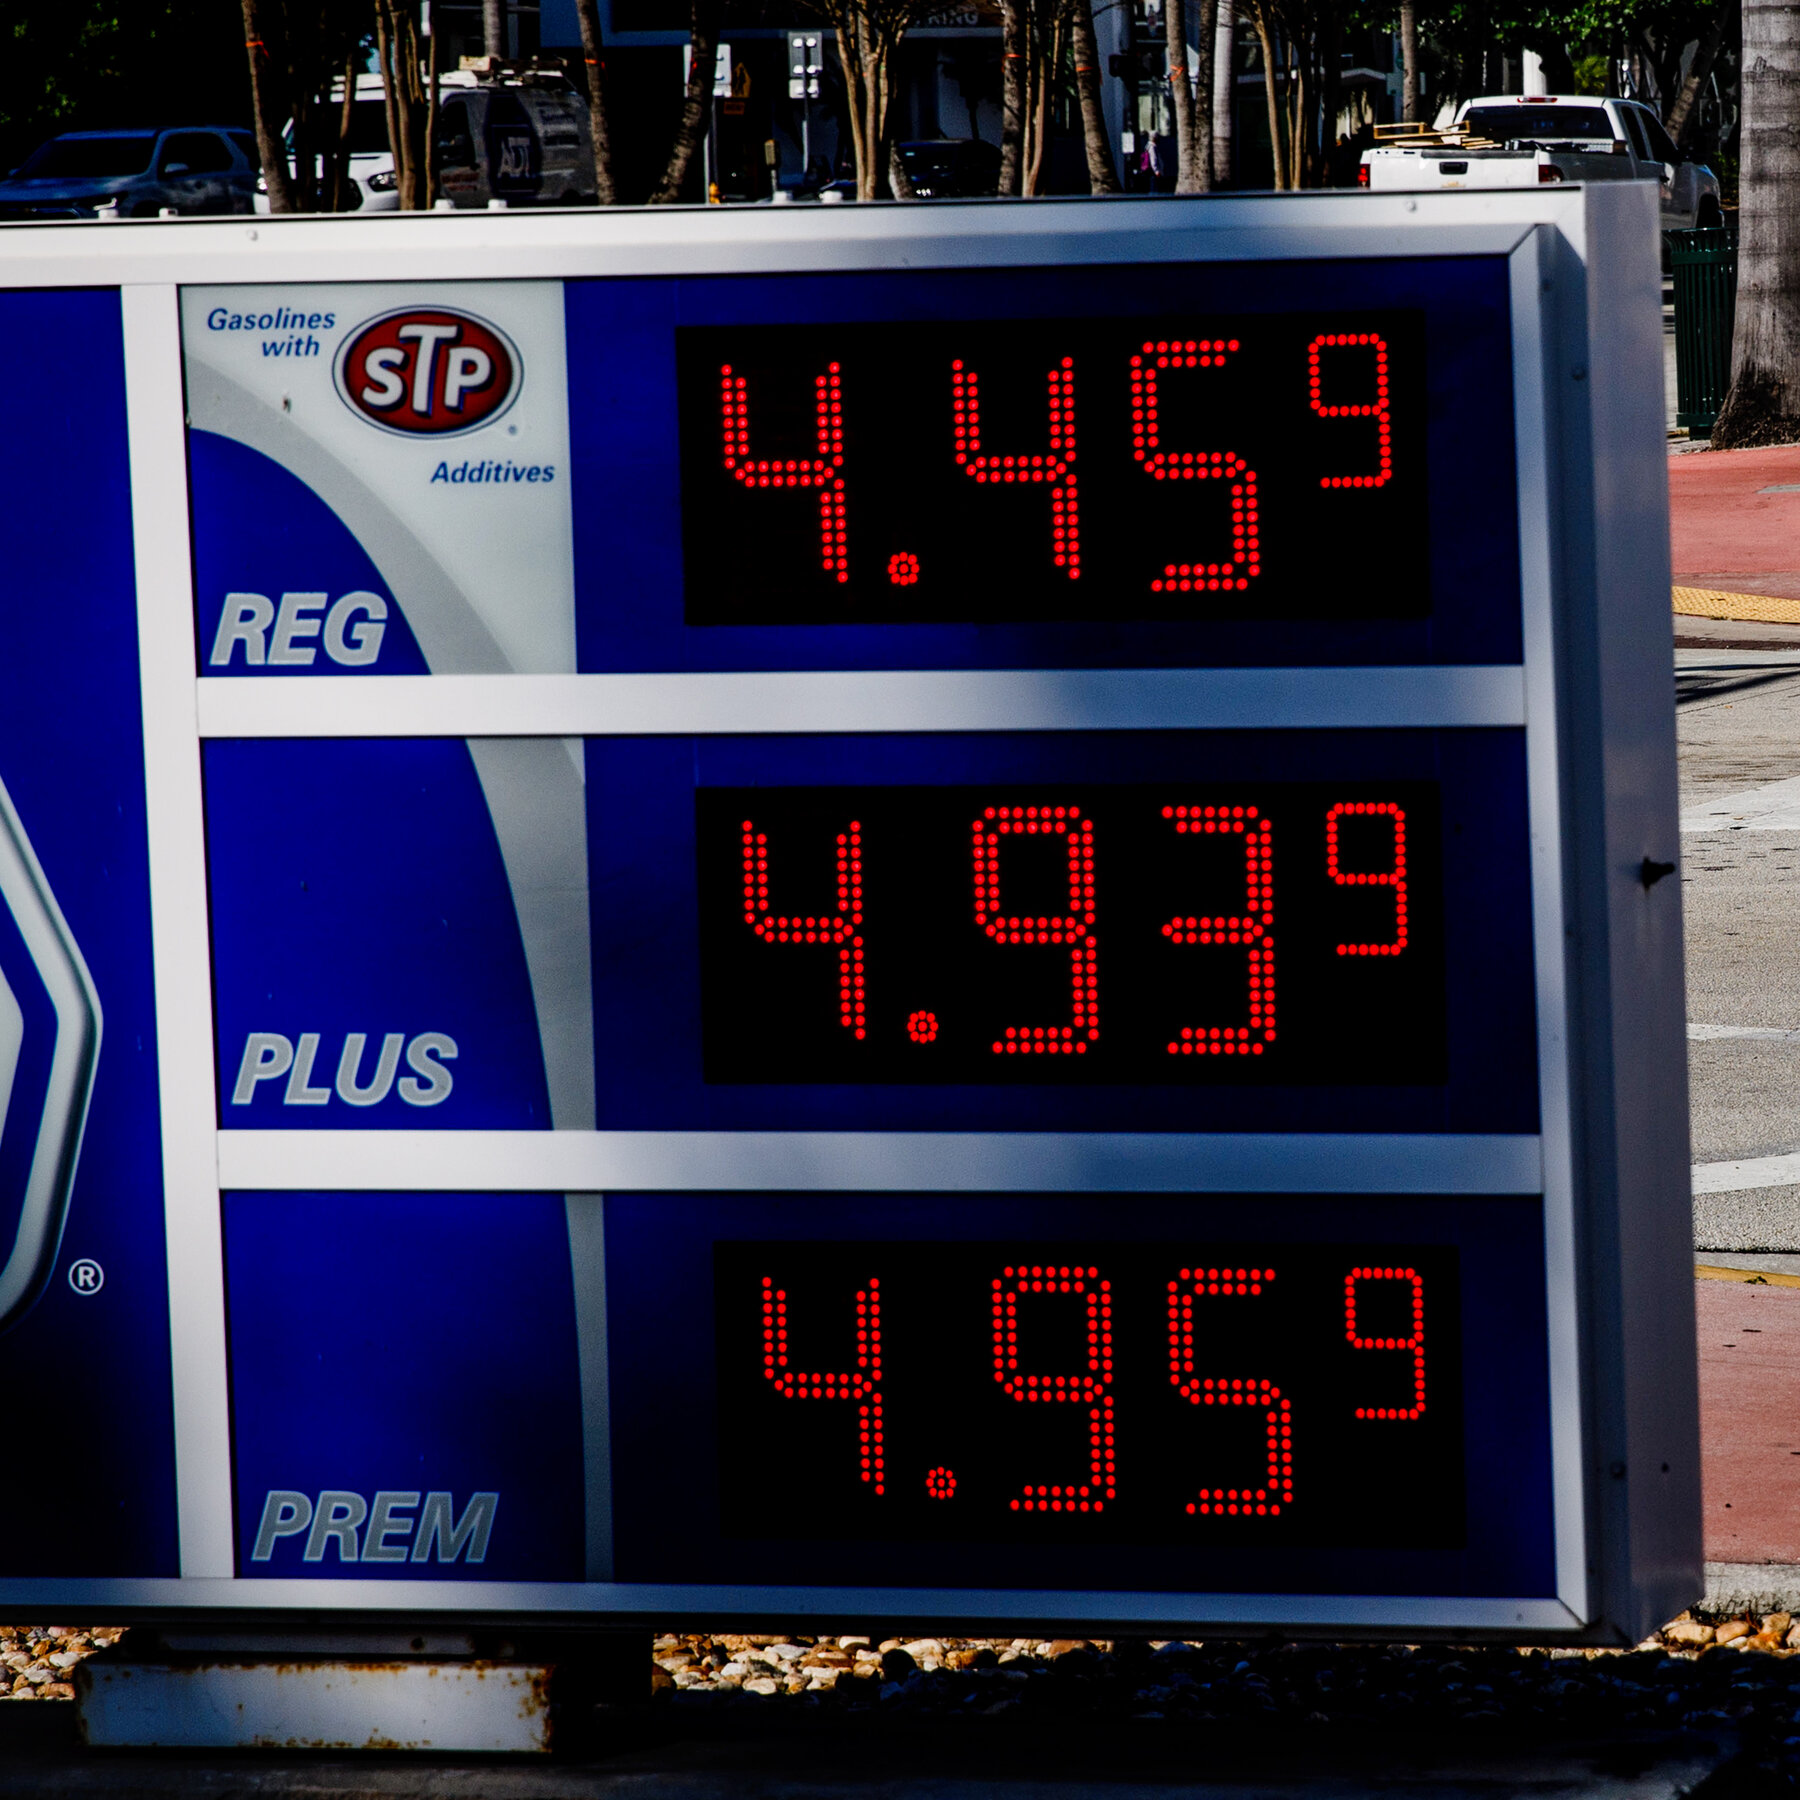 U.S. Weighs Russian Oil Ban as Gas Prices Surge and Ukraine War Grows